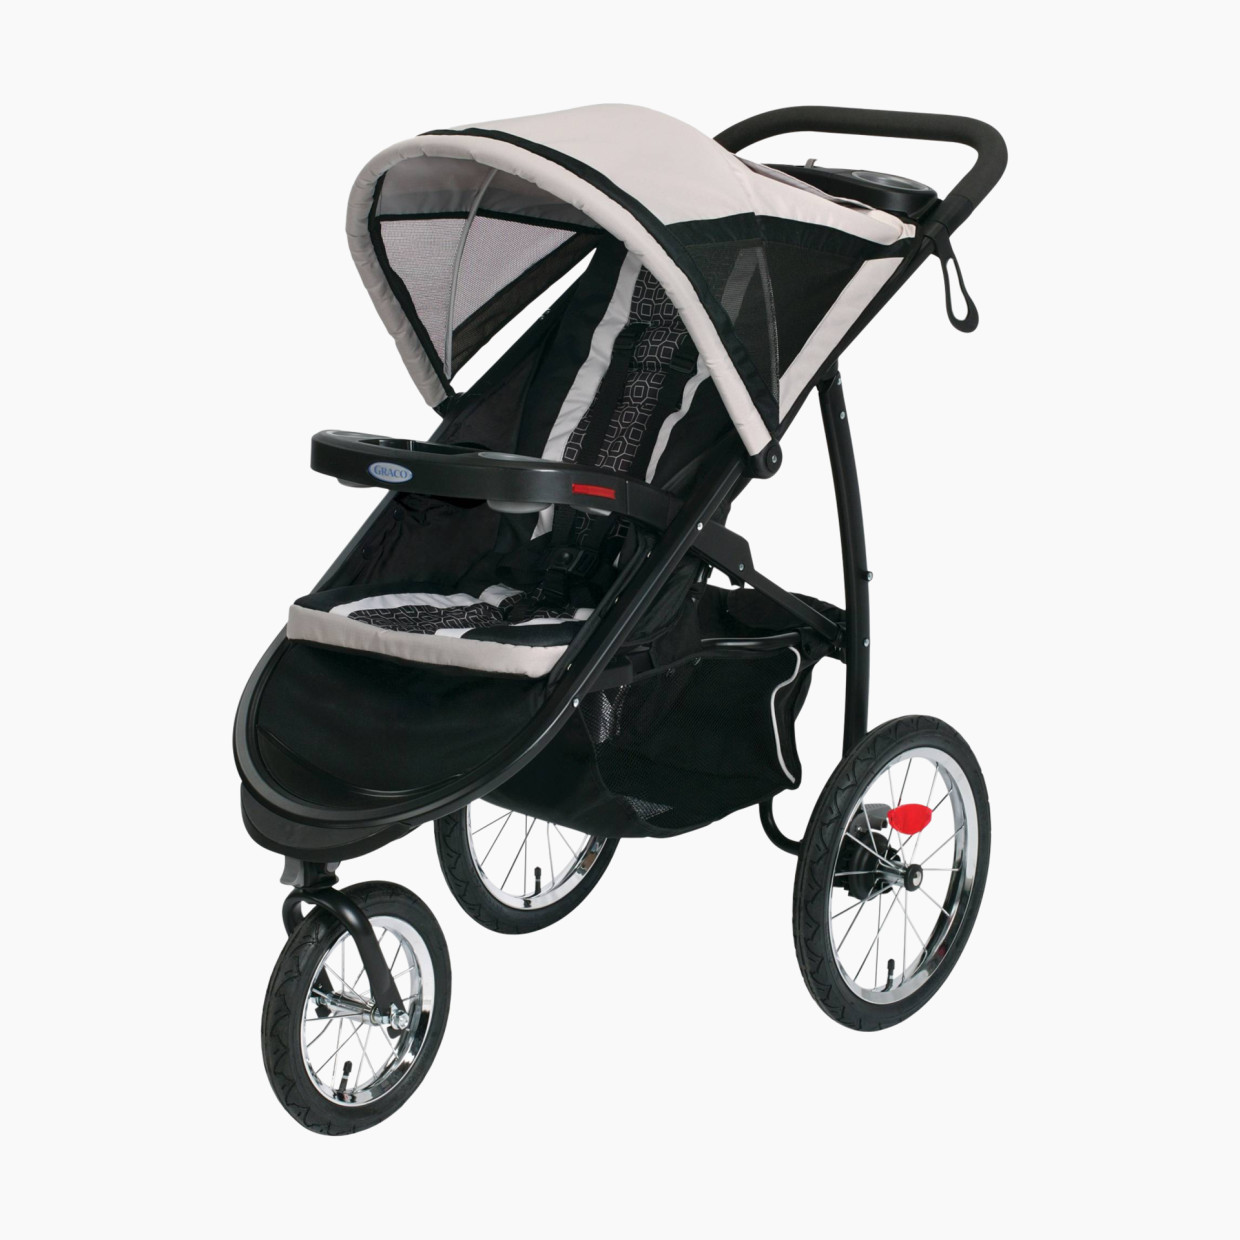 Graco Fastaction Fold Jogger Click Connect Stroller - Pierce.